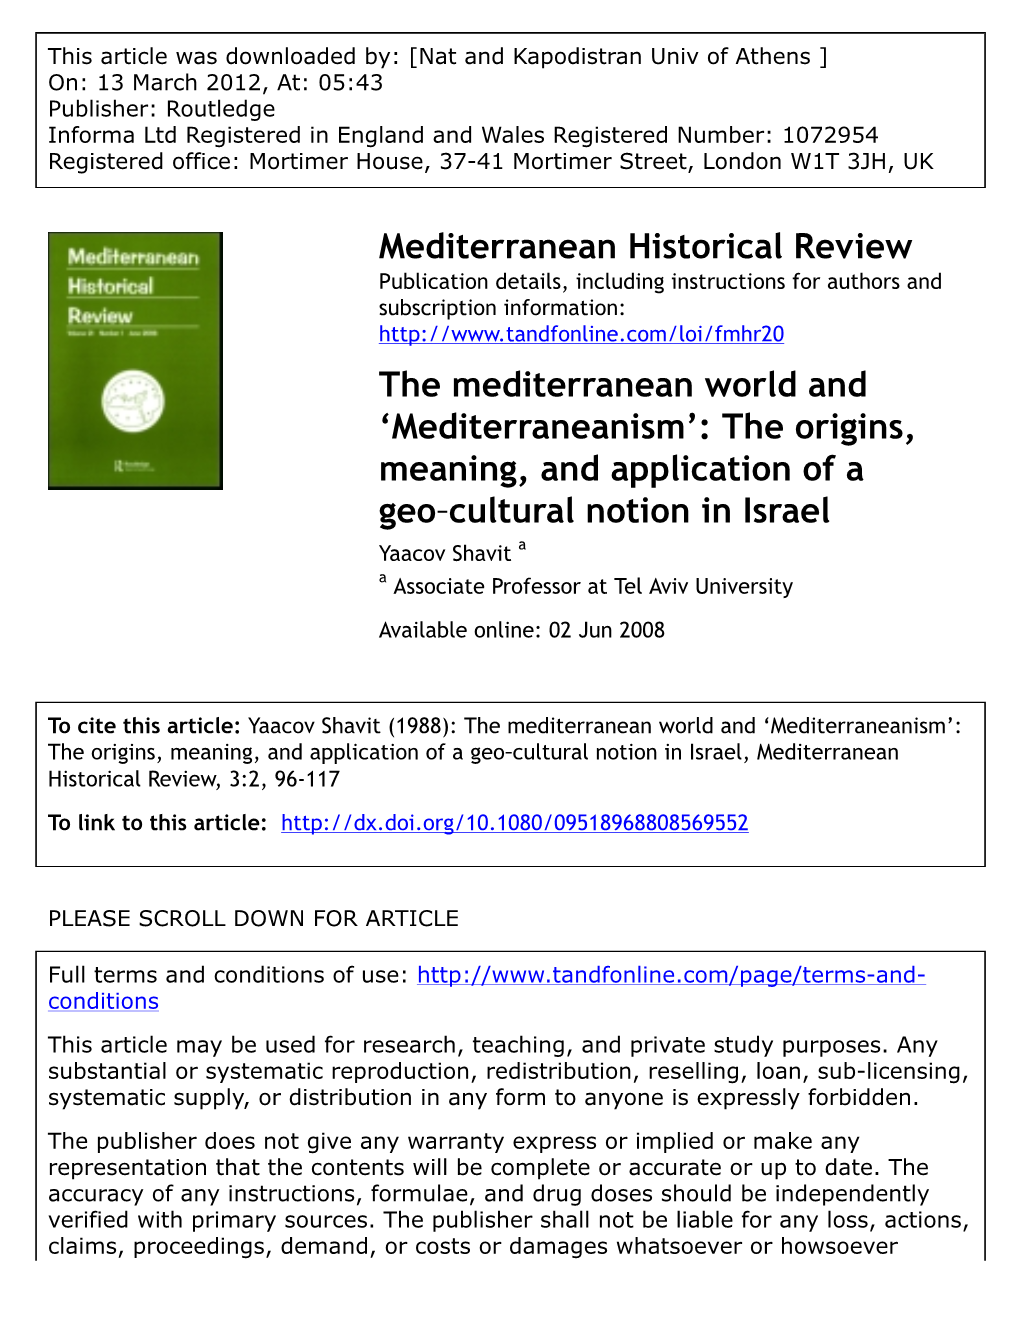 'Mediterraneanism': the Origins, Meaning, and Application of a Geo‐Cultural Notion in Israel